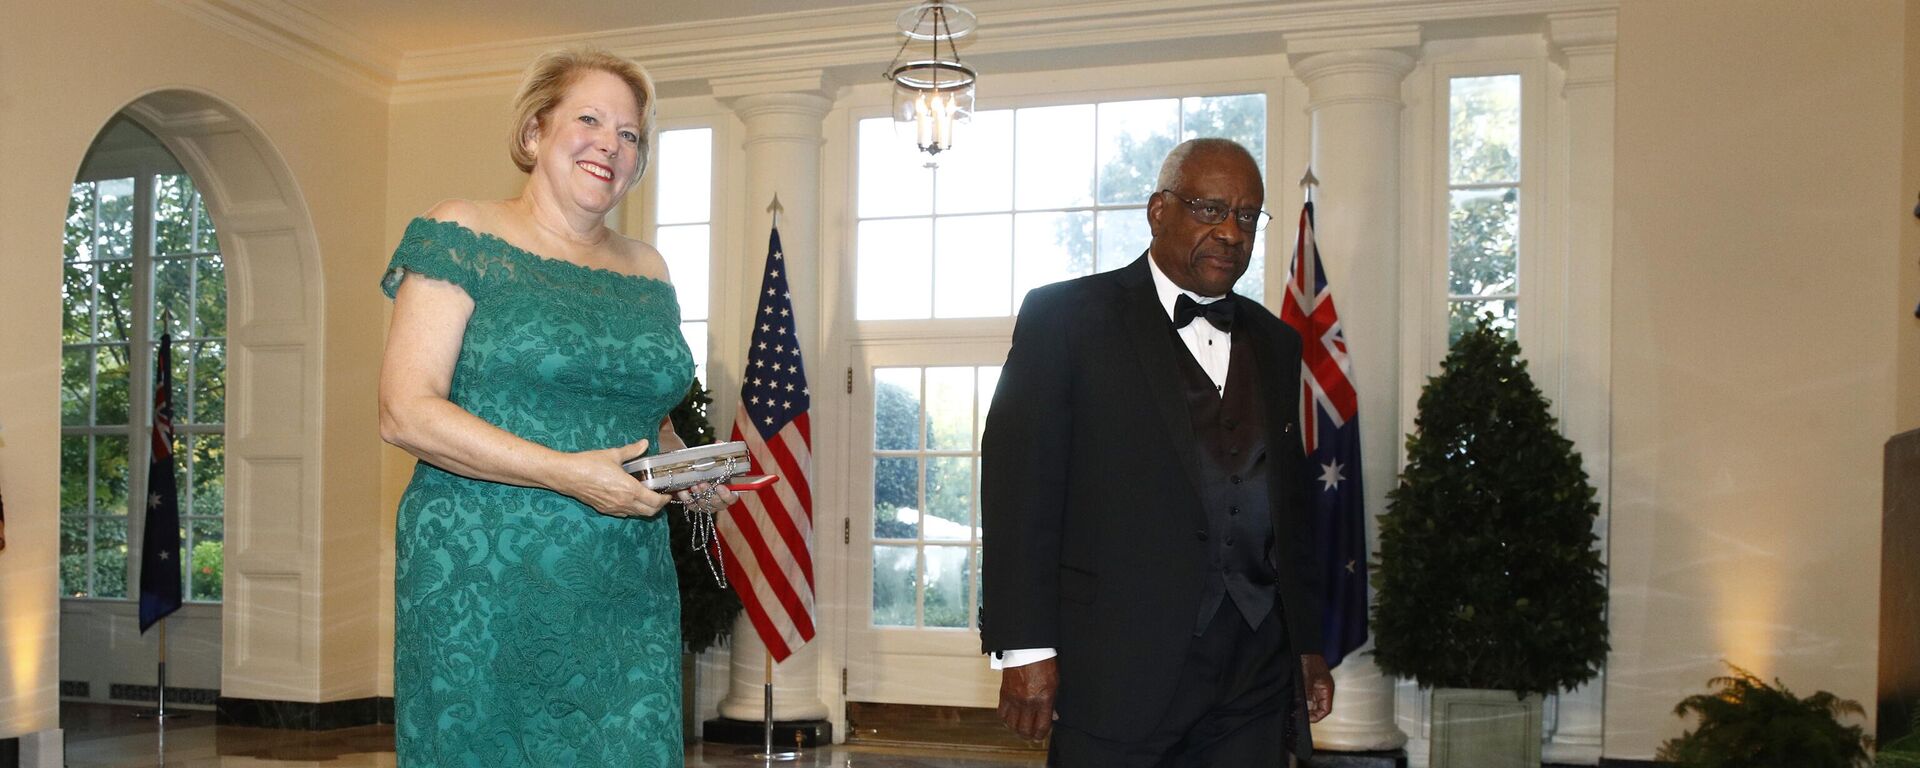 In this Sept. 20, 2019, file photo, Supreme Court Associate Justice Clarence Thomas, right, and wife Virginia Ginni Thomas arrive for a State Dinner with Australian Prime Minister Scott Morrison and President Donald Trump at the White House in Washington. Ginni Thomas is using her Facebook page to amplify unsubstantiated claims of corruption by Joe Biden. She is a longtime conservative activist who asked her more than 10,000 followers Oct. 26, 2020, to consider sharing a link focused on alleged corruption by Biden and his son, Hunter, as well as claims that social media companies are censoring reports about the Bidens. - Sputnik International, 1920, 25.03.2022